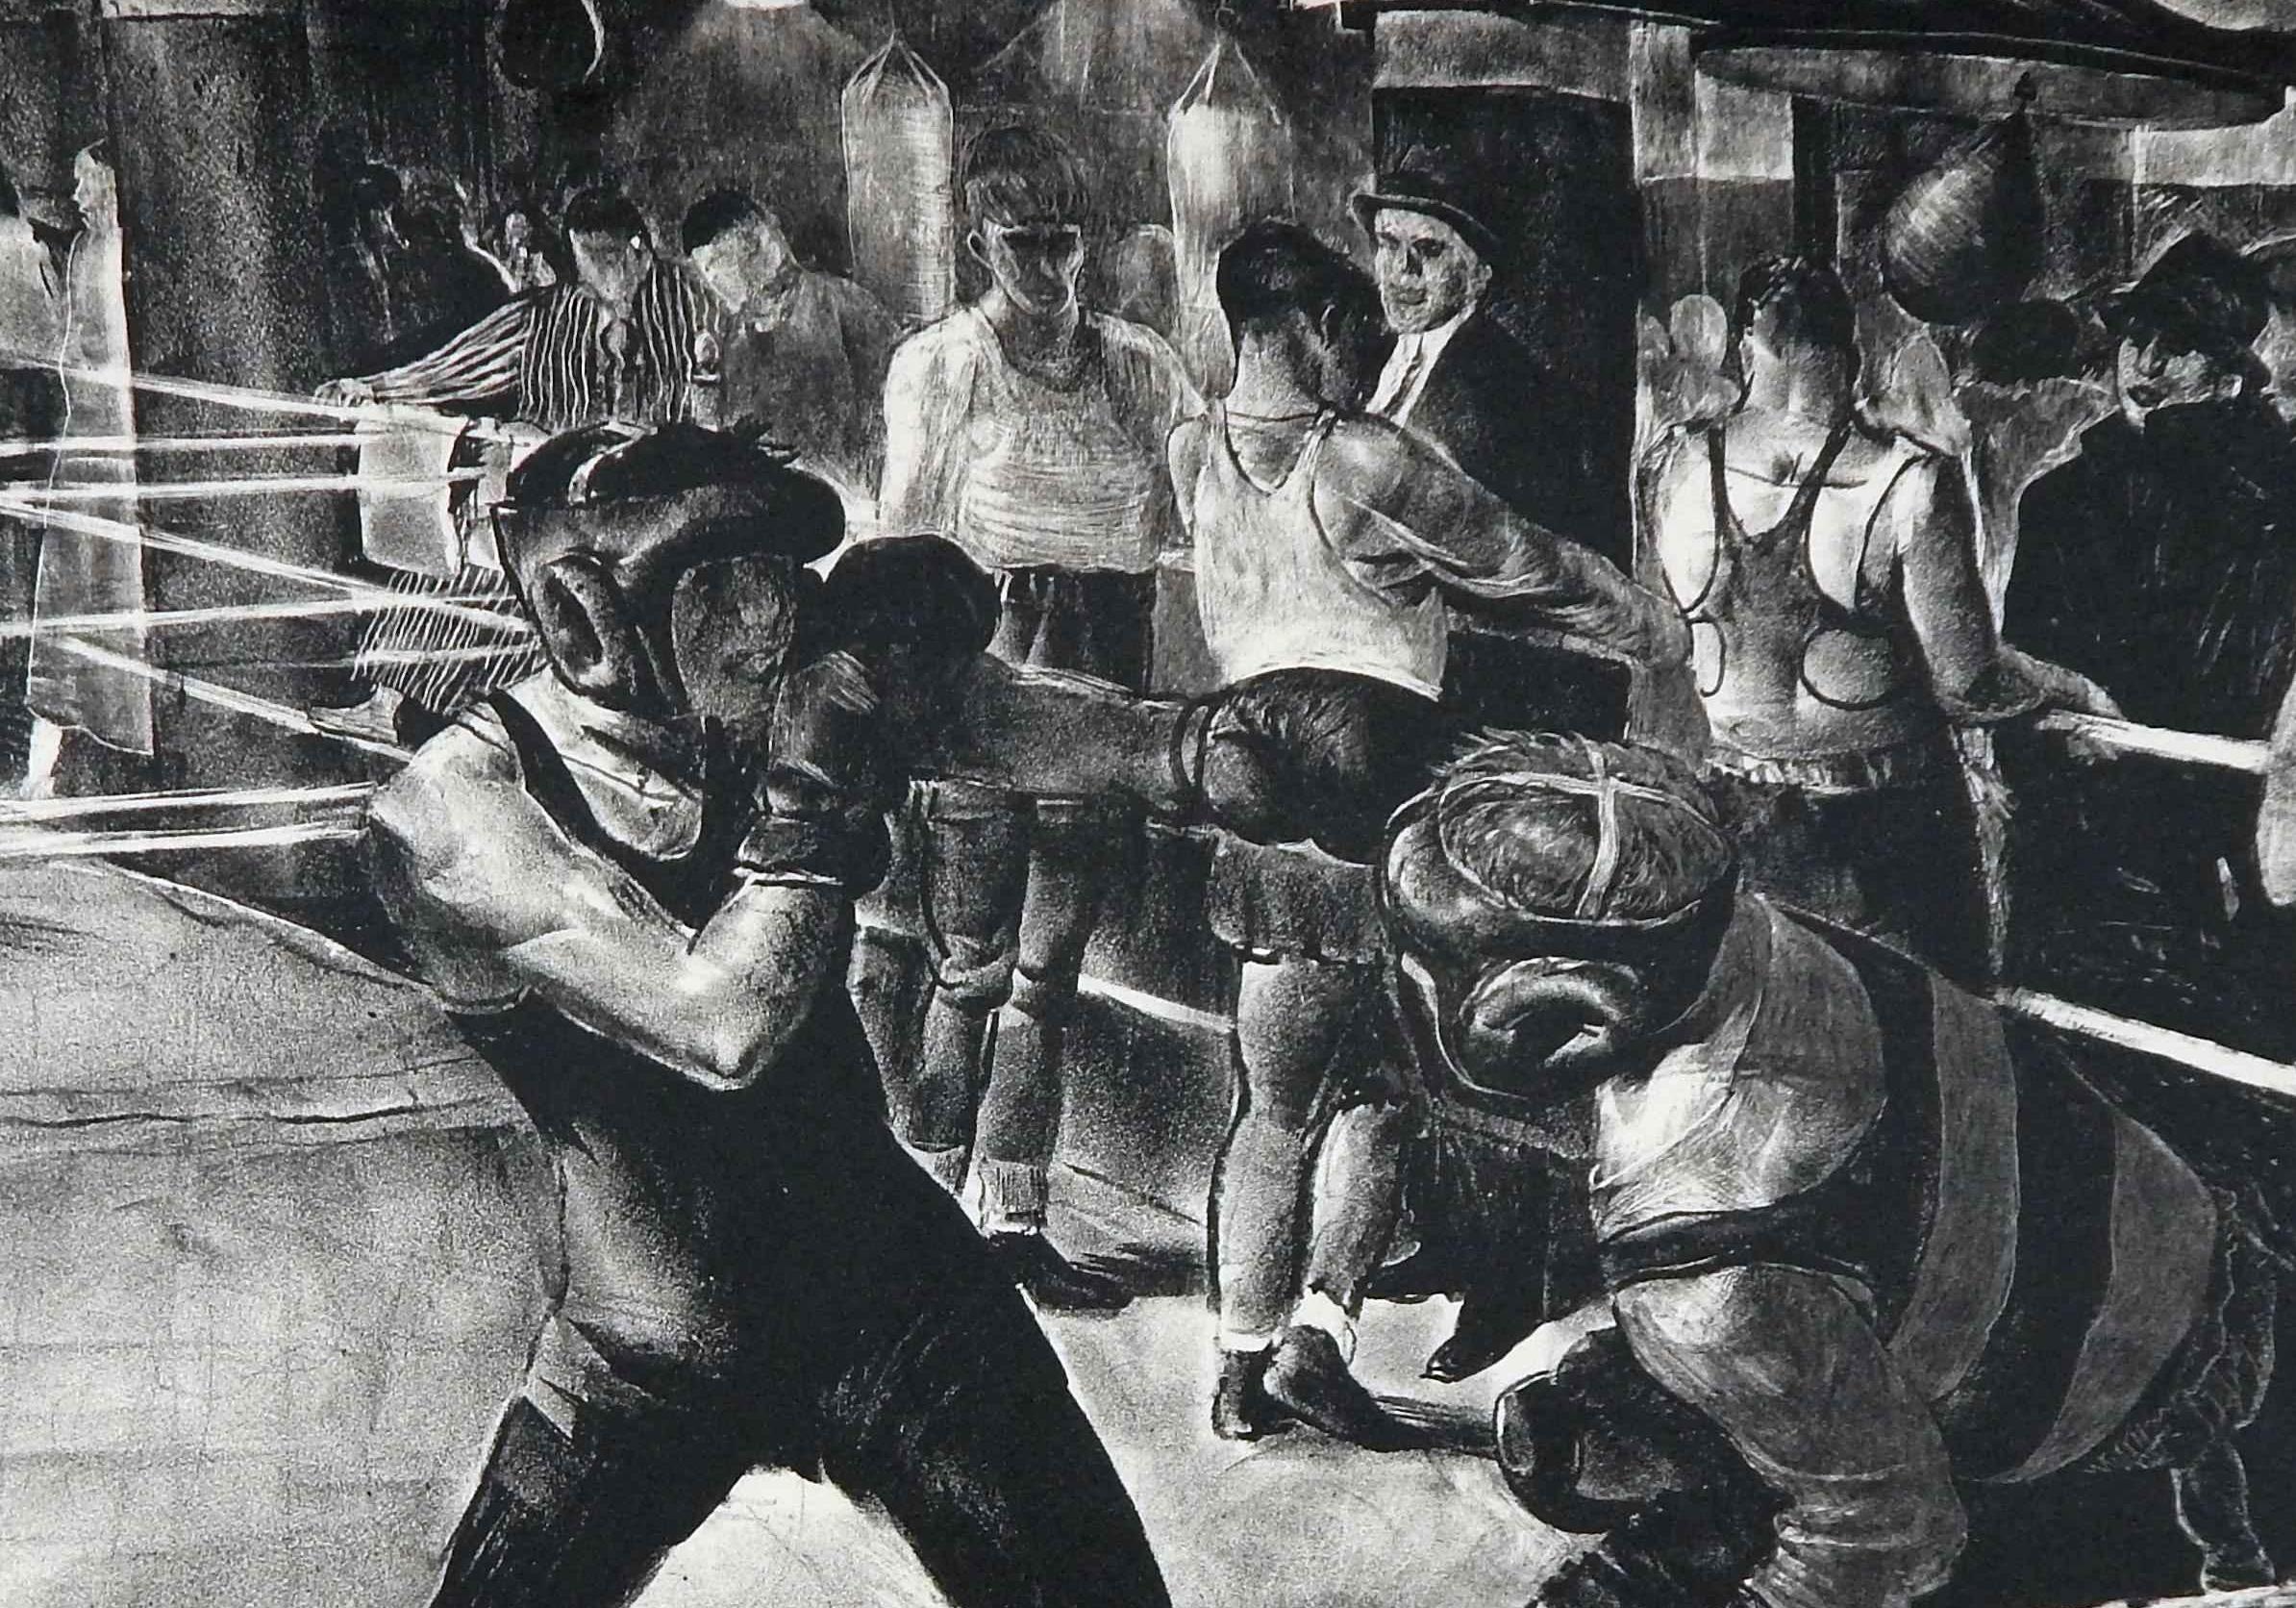 Boxing subject original stone lithograph by Robert Riggs (1896-1970)
Pencil titled lower left “Afternoon at Max’s”
Pencil signed lower right “Robert Riggs”
Image measures 15 1/8